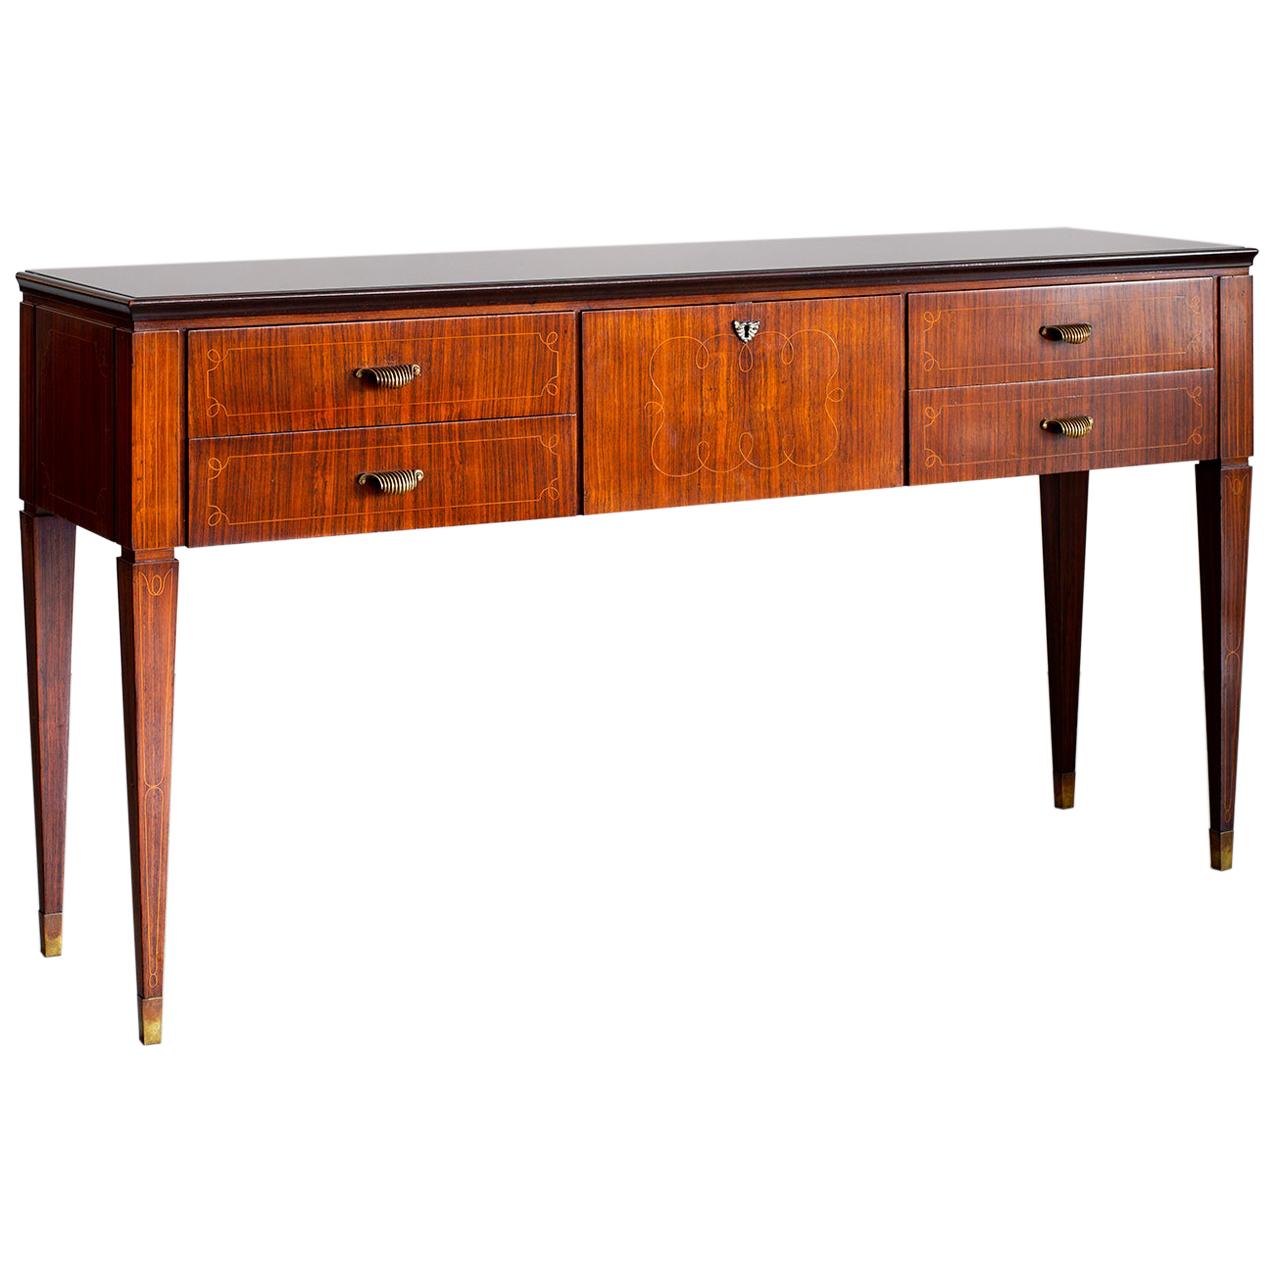 Sideboard, attributed to Paolo Buffa, circa 1940's